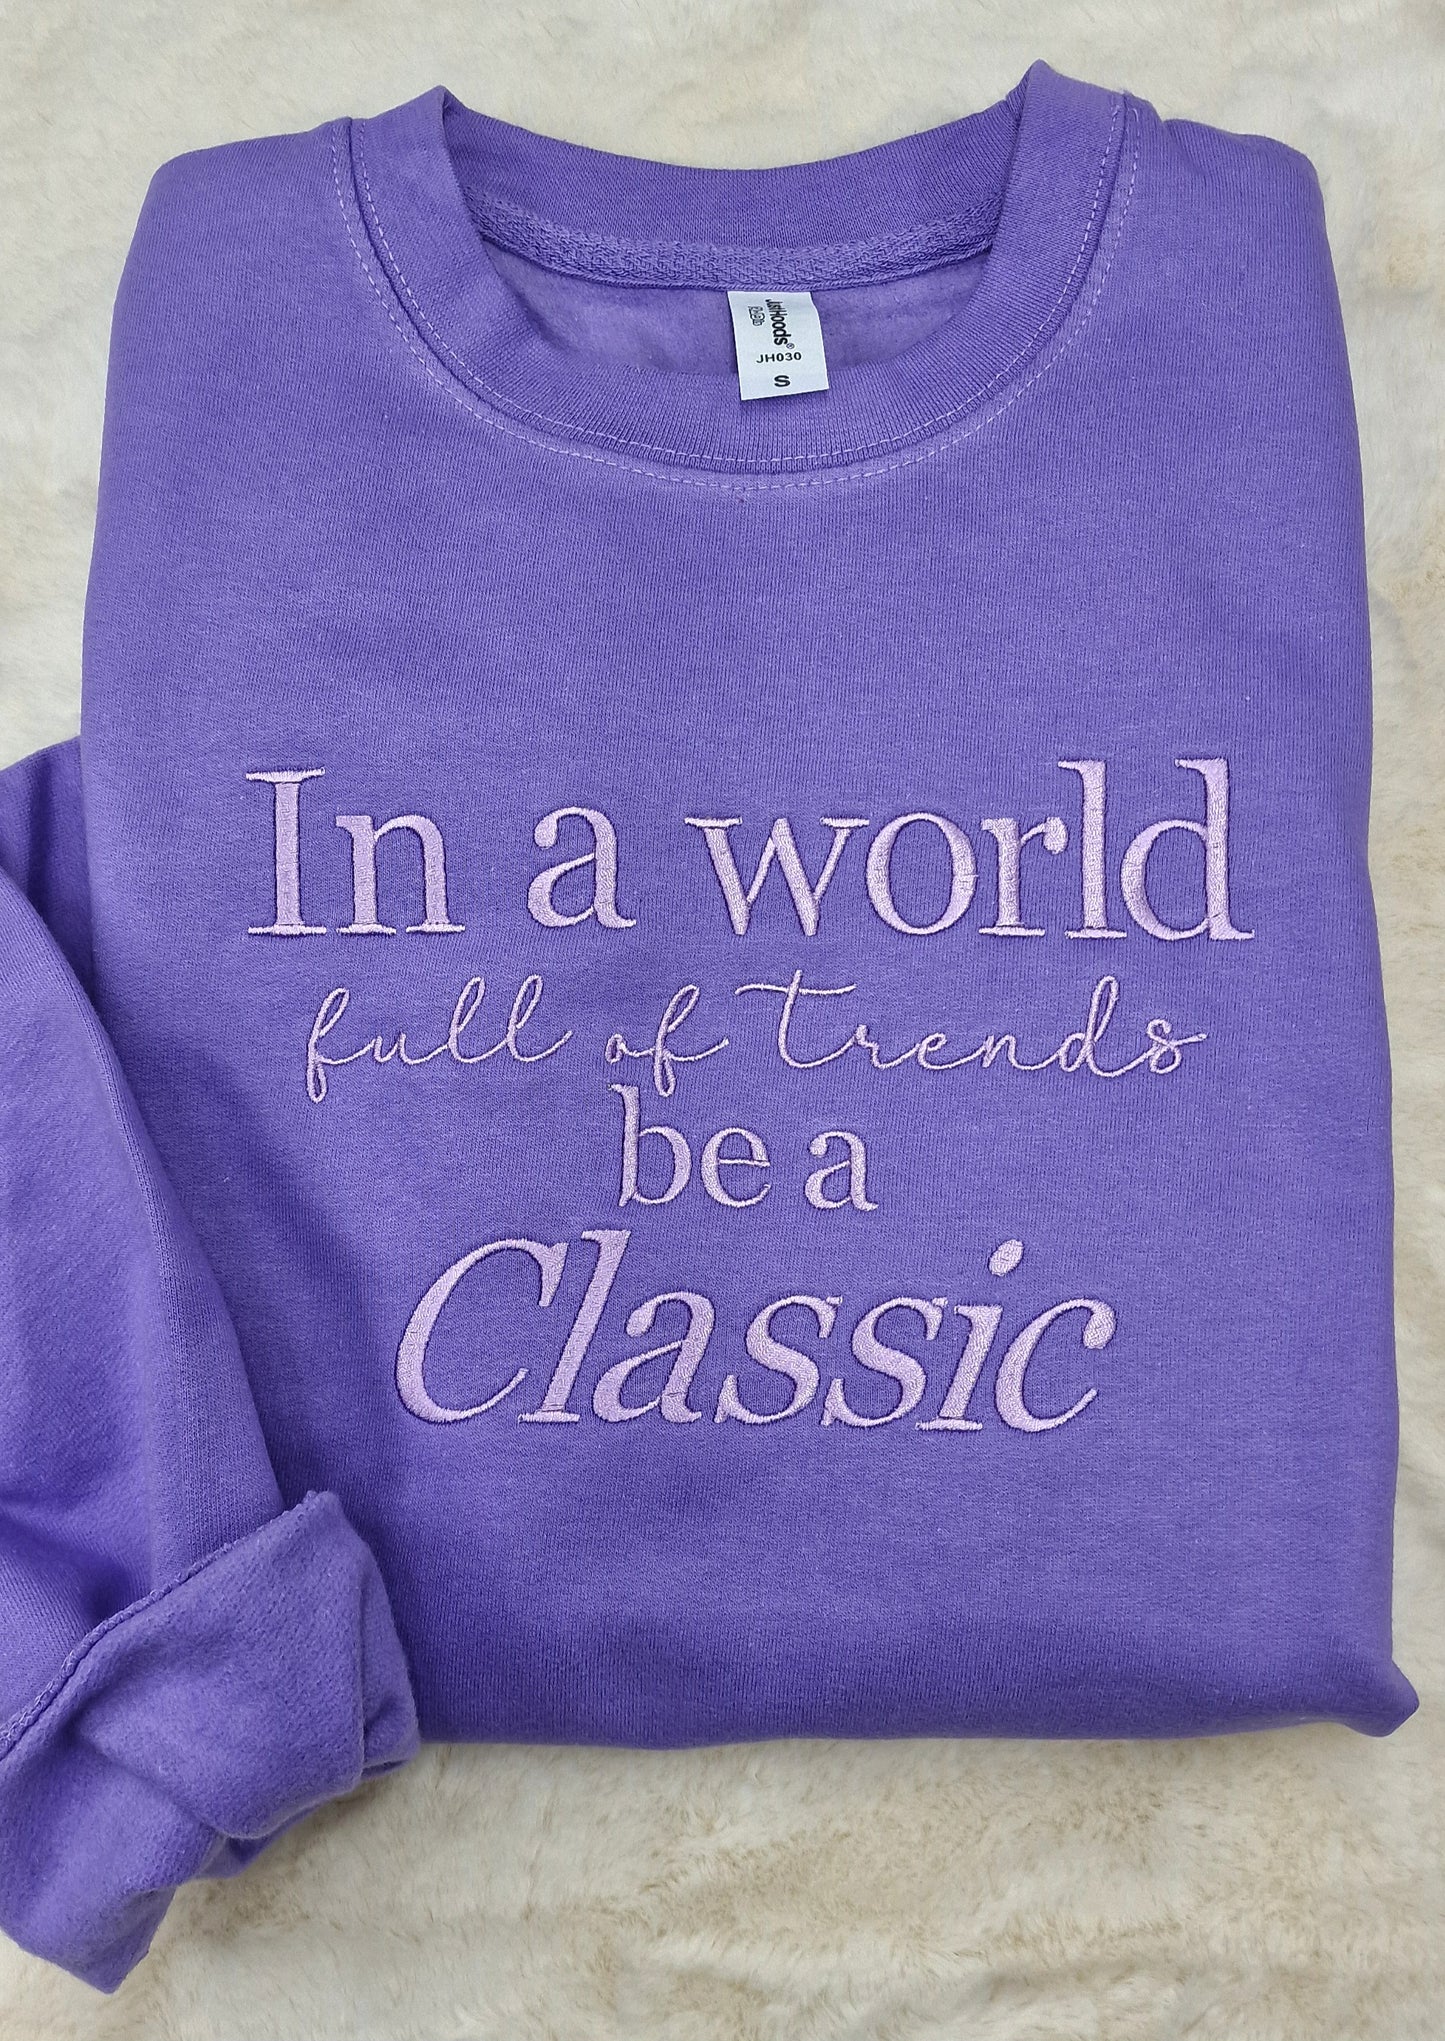 In a world full of trends be a classic sweater